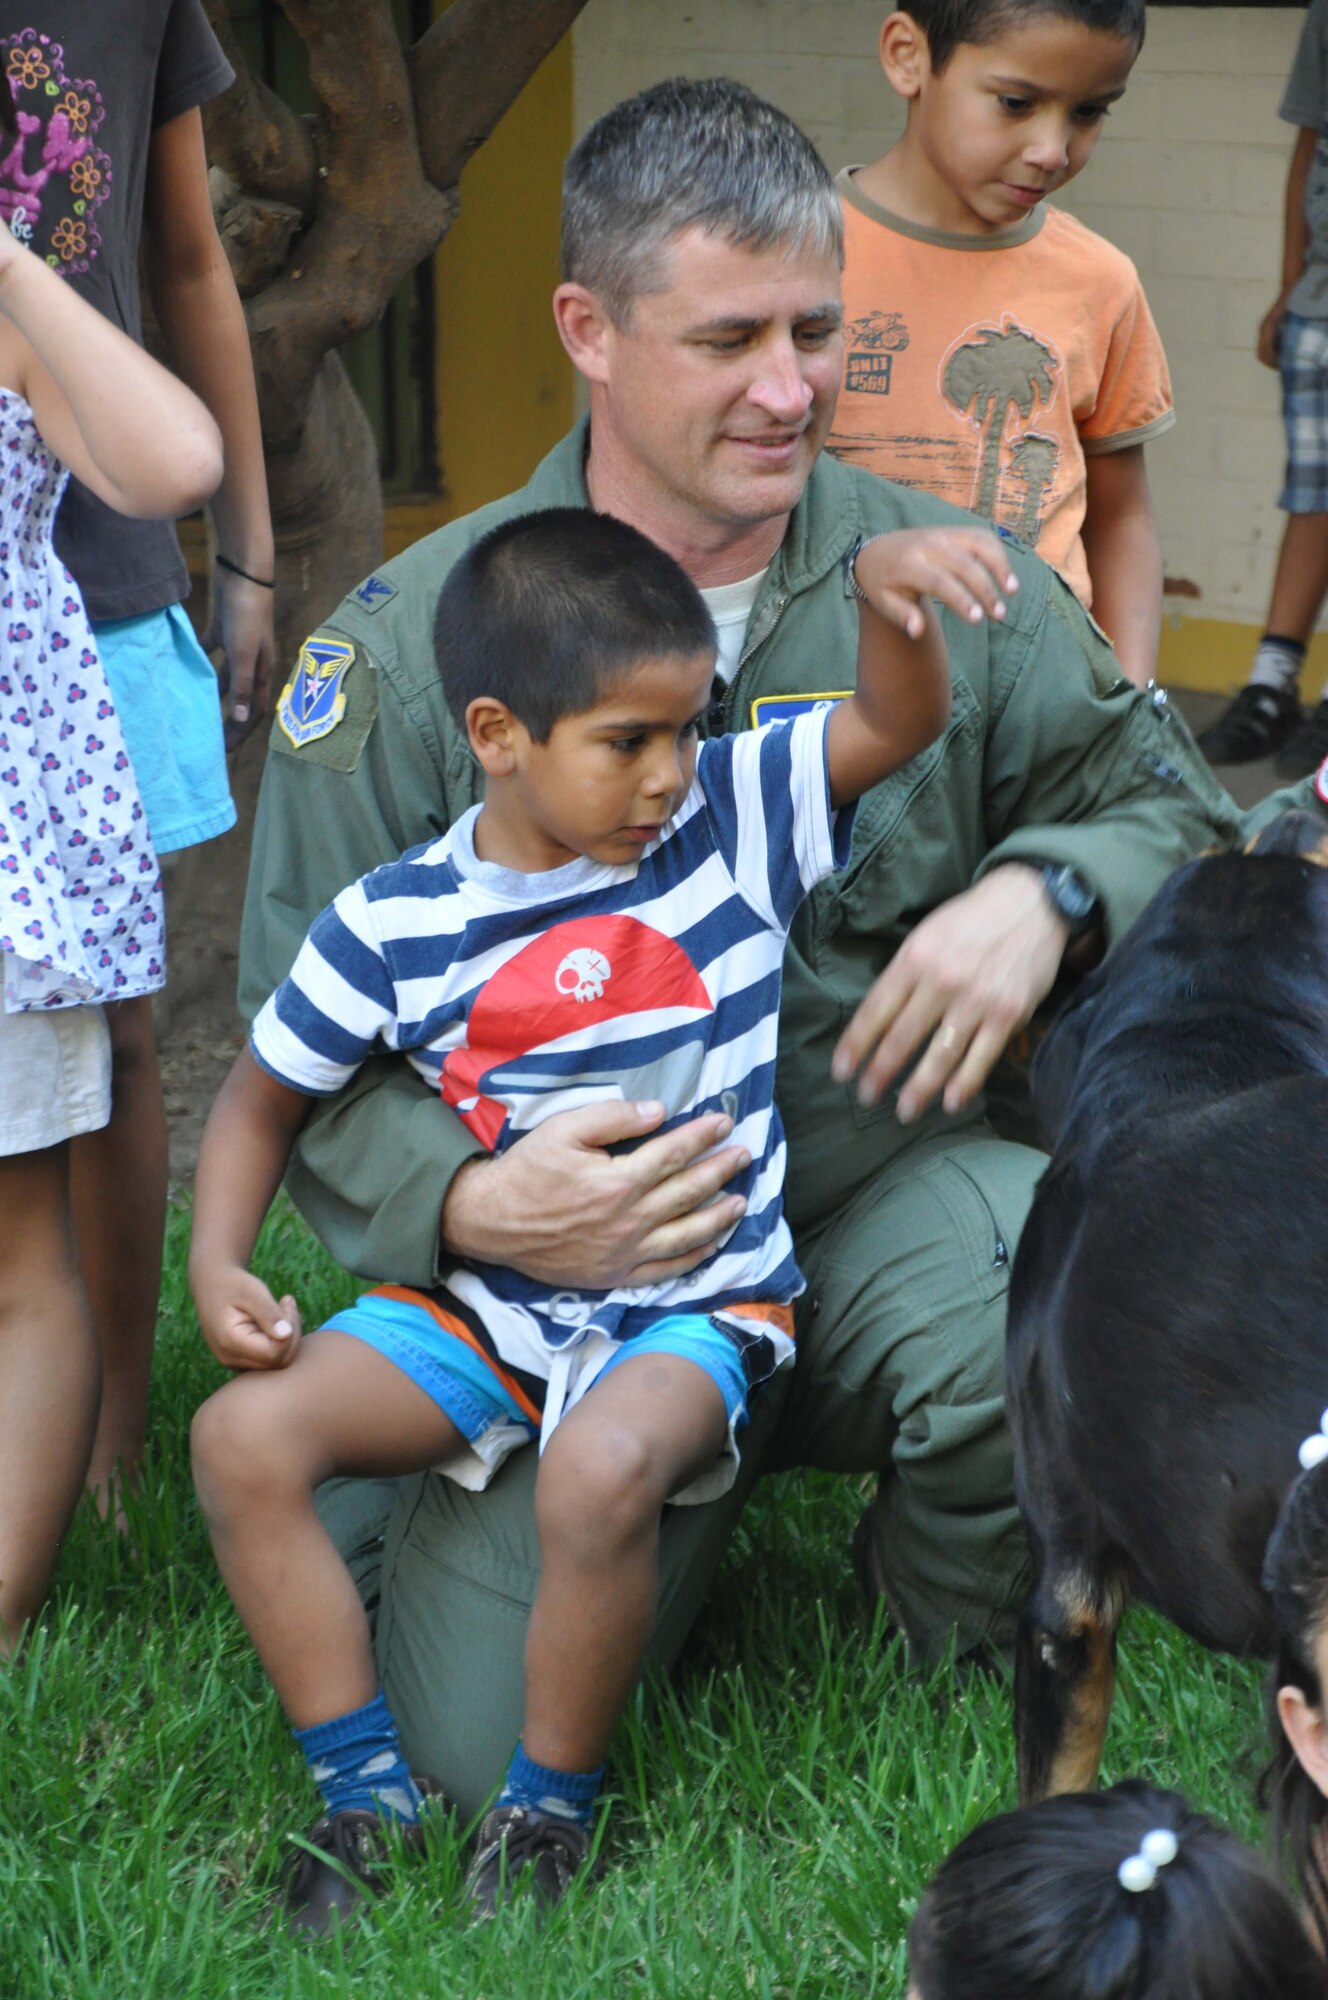 SANTIAGO, Chile – Col. Stephen Pedrotty, 12th Air Force (Air Forces Southern) Air Boss/A3 director, visited children to teach them about space partnerships at the SOS Aldeas orphanage in Santiago, Chile, March 29. The Chilean air force invited U.S. Airmen to help them give back to the community by visiting local hospitals and orphanages this week.  (U.S. Air Force photo/Master Sgt. Kelly Ogden)